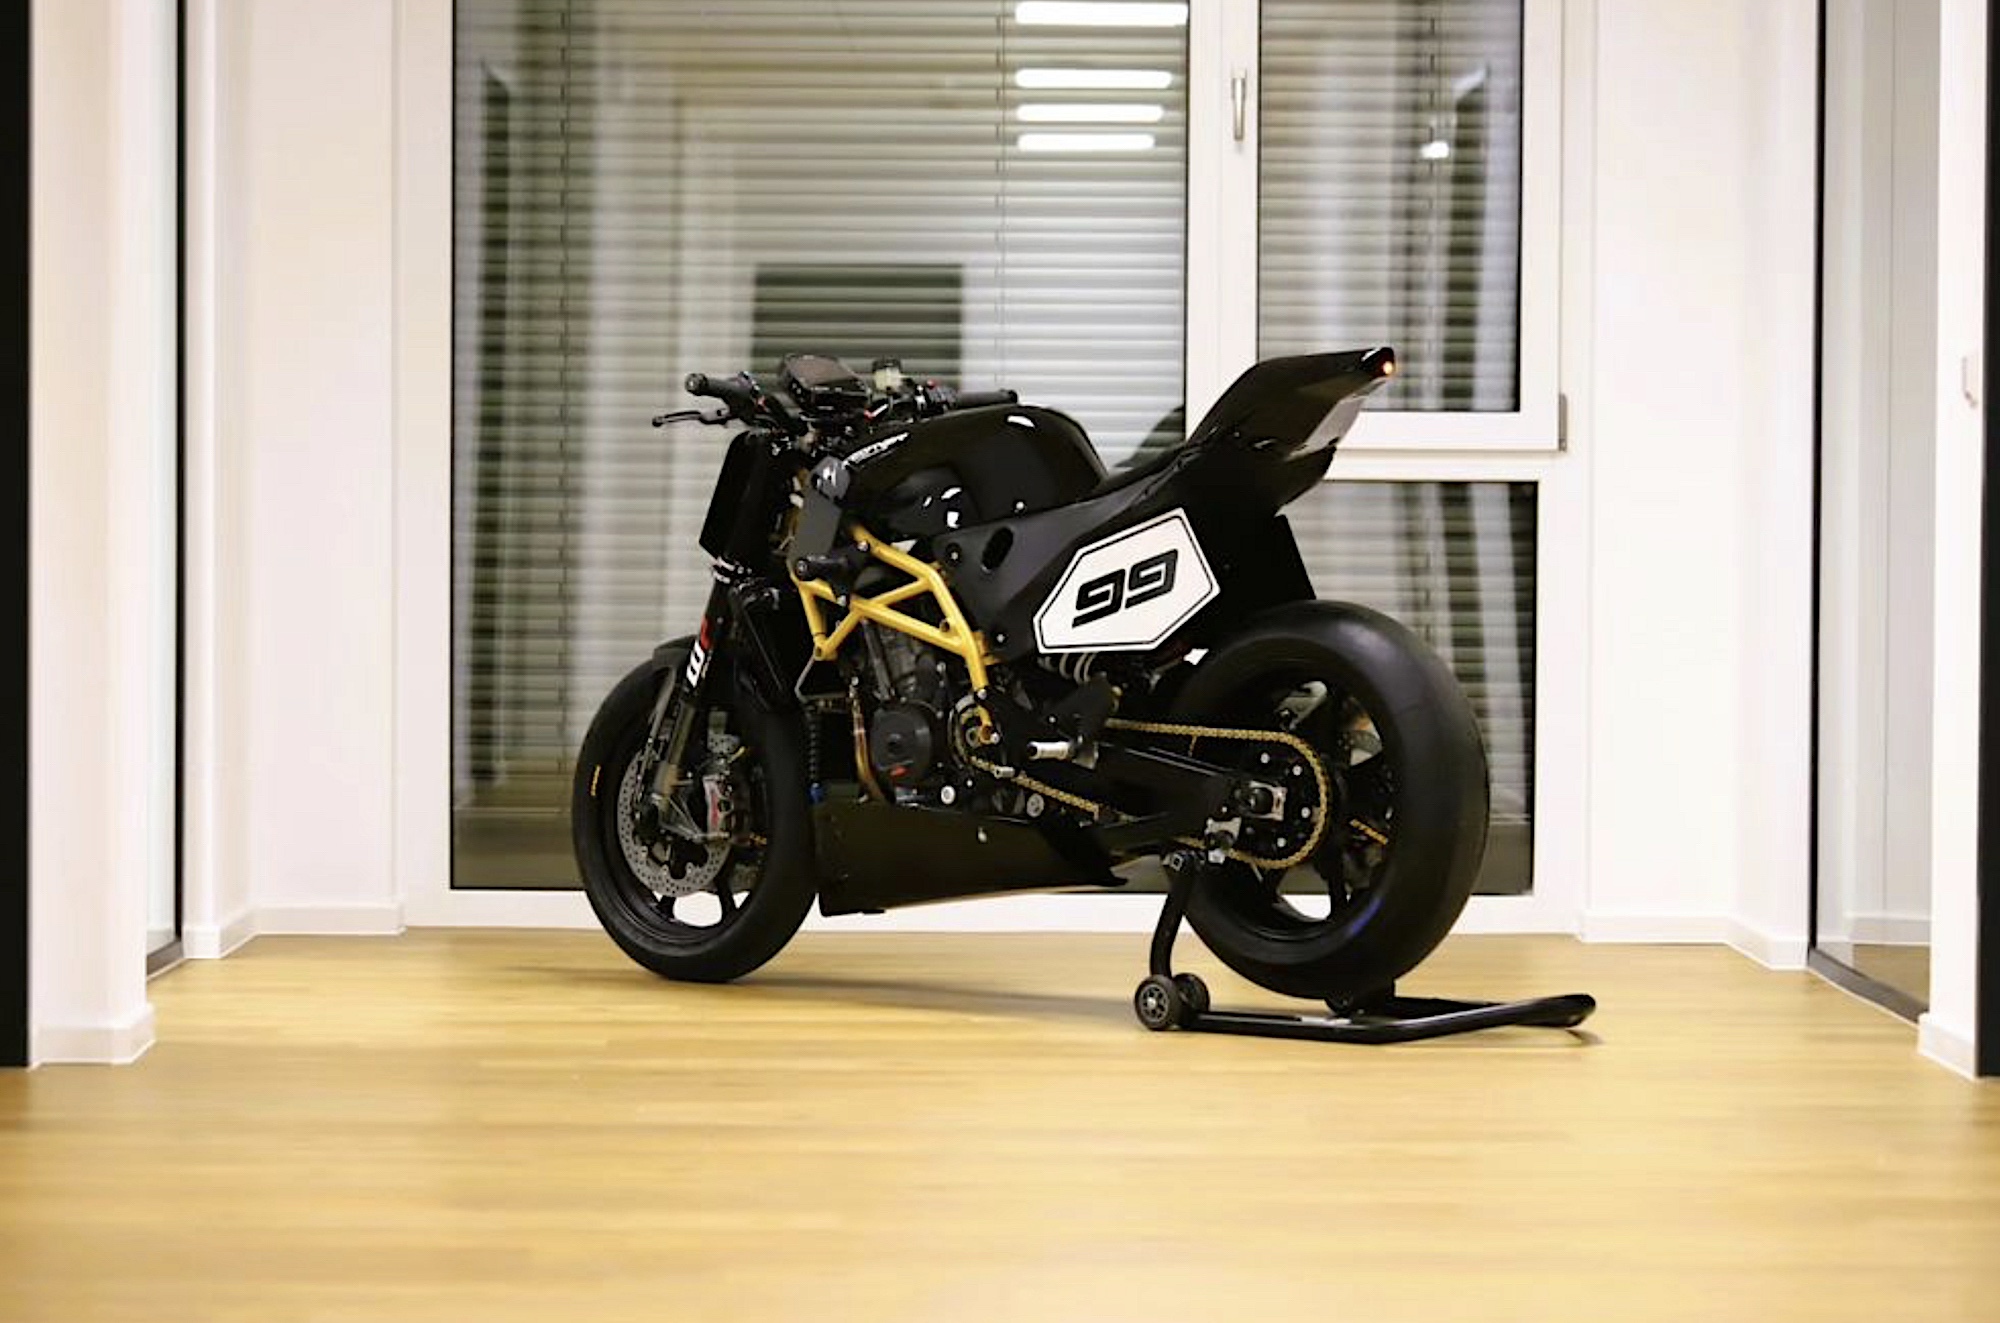 A view of the Krämer Super Hooligan Concept motorcycle.